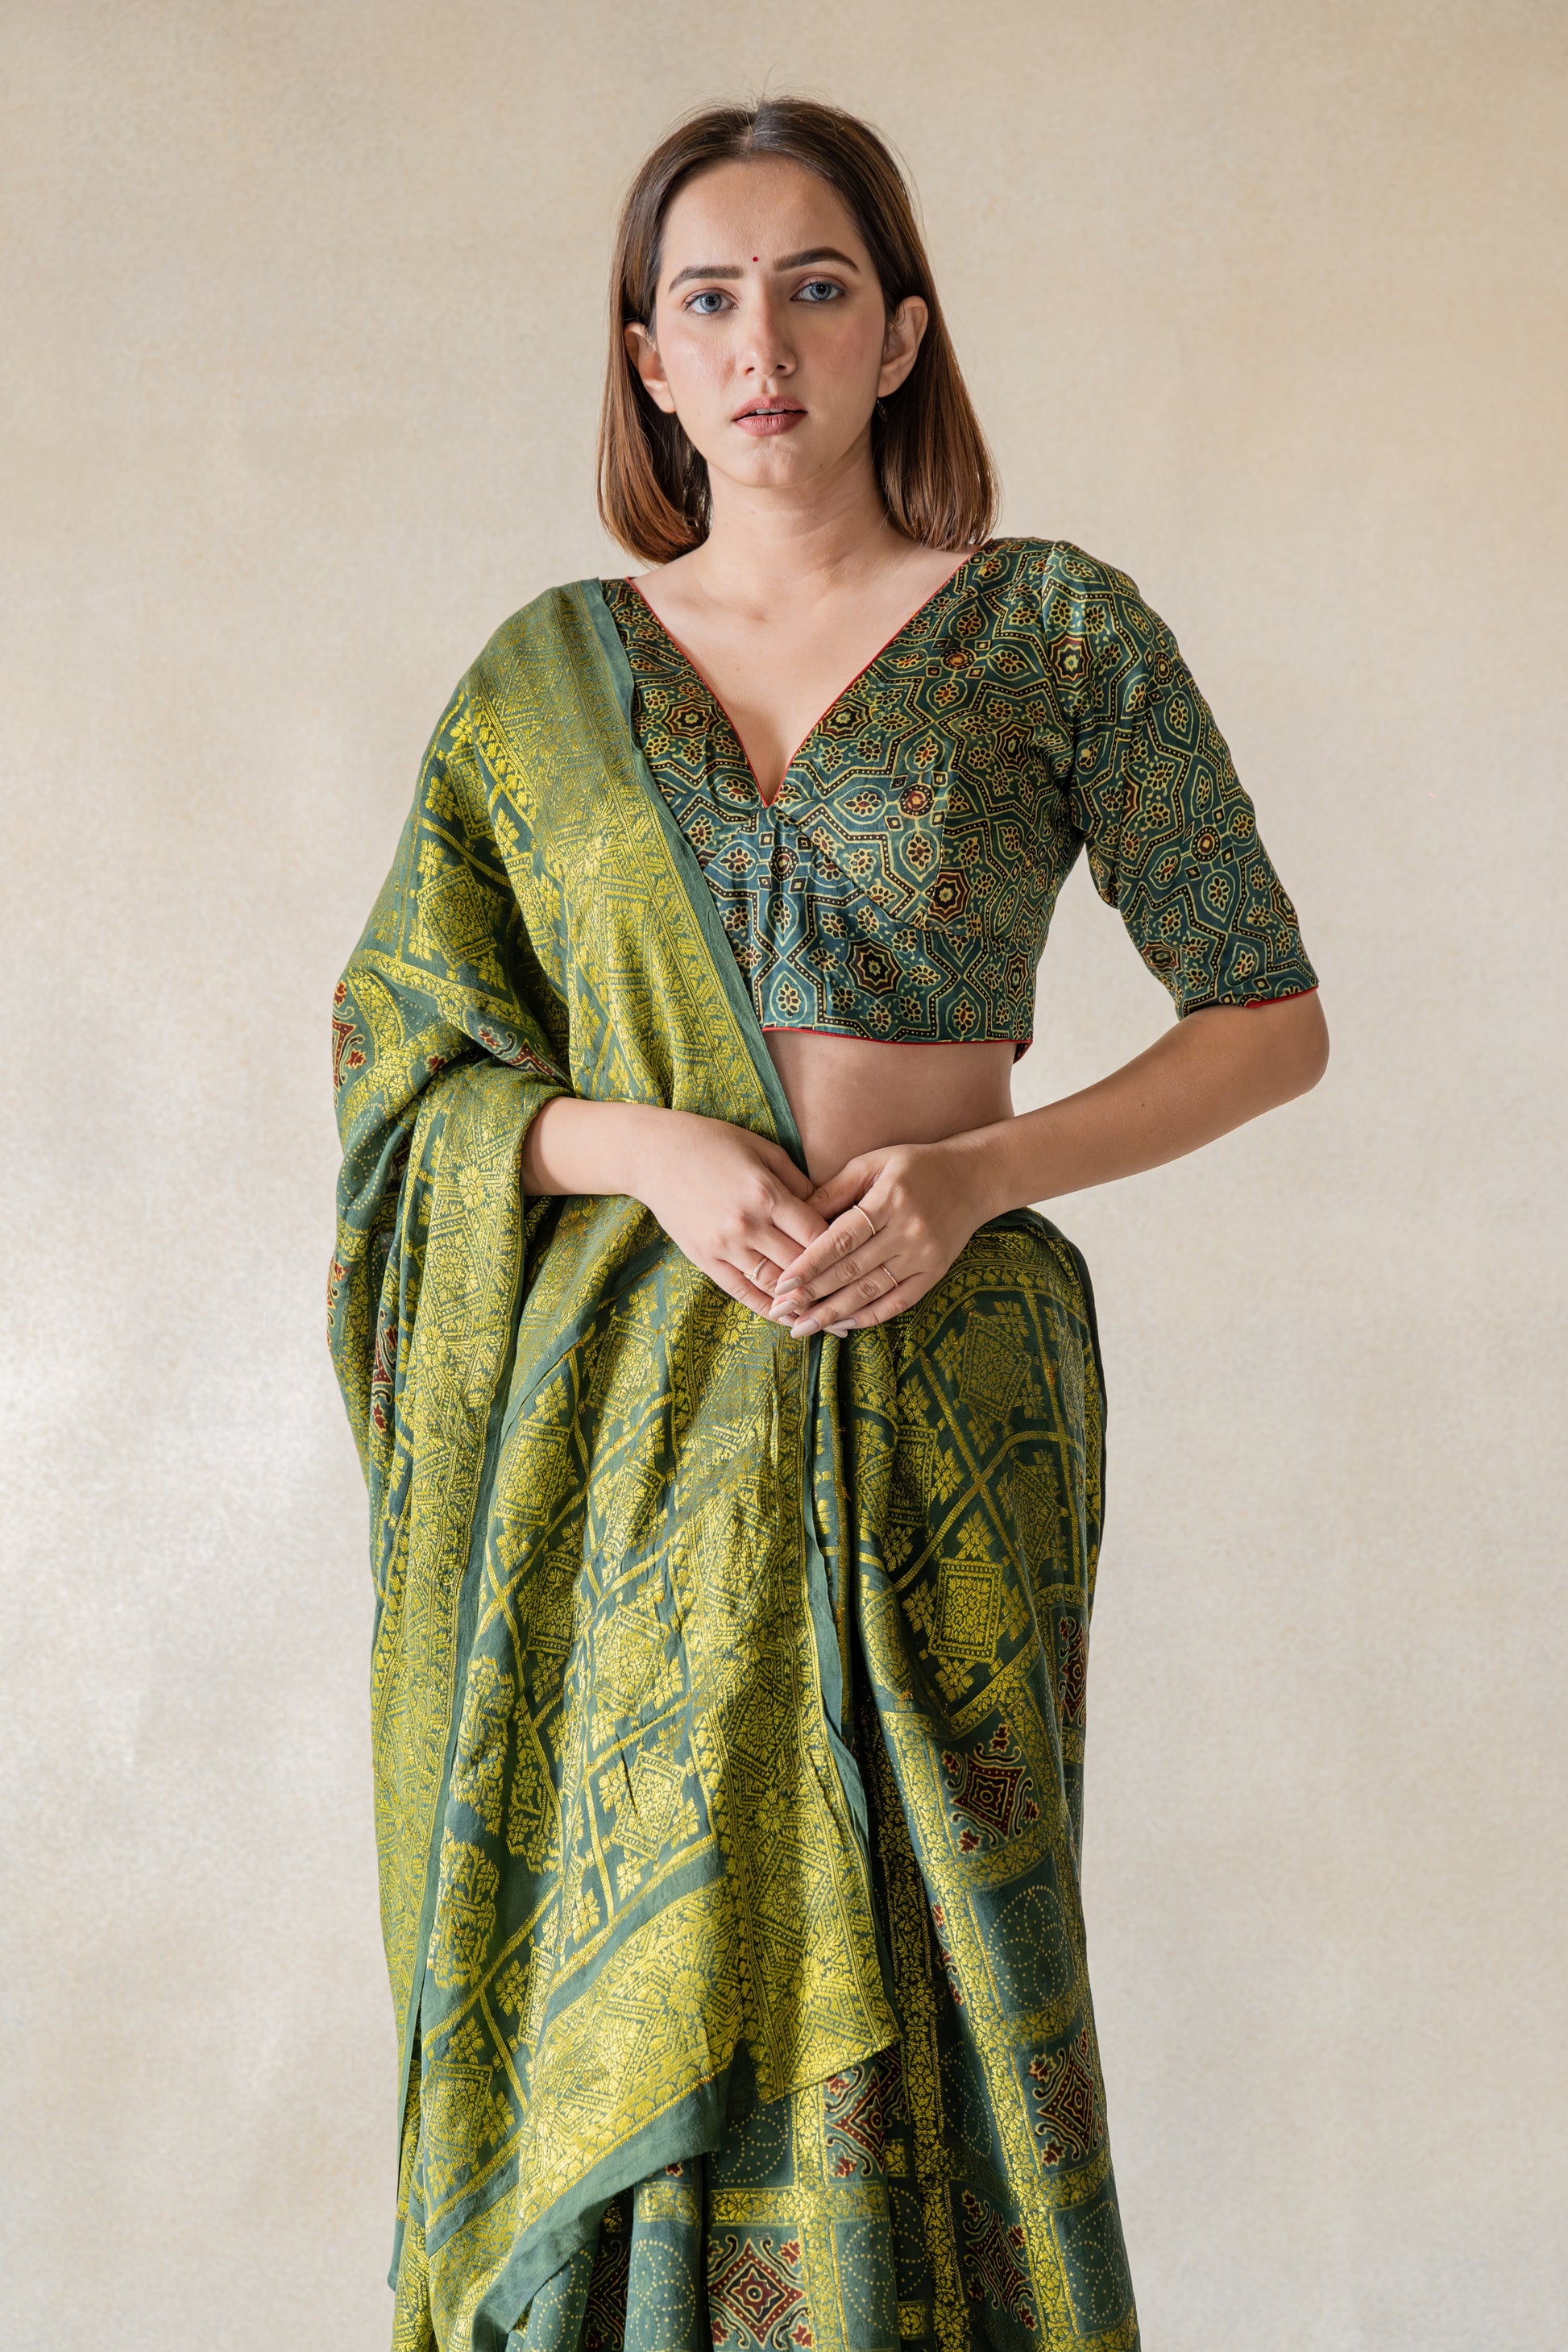 Indulge in luxury with our Green - Ajrakh Modal Silk Blouse. Handcrafted with authentic ajrakh hand block printing and natural green dyes, this blouse exudes elegance. The luxurious and comfort blend of modal silk and pure cotton lining ensure breathability and style. Slow made with intricate details, it features a charming V neck in front and button closure in the back. An exclusive piece for those who appreciate sophistication.